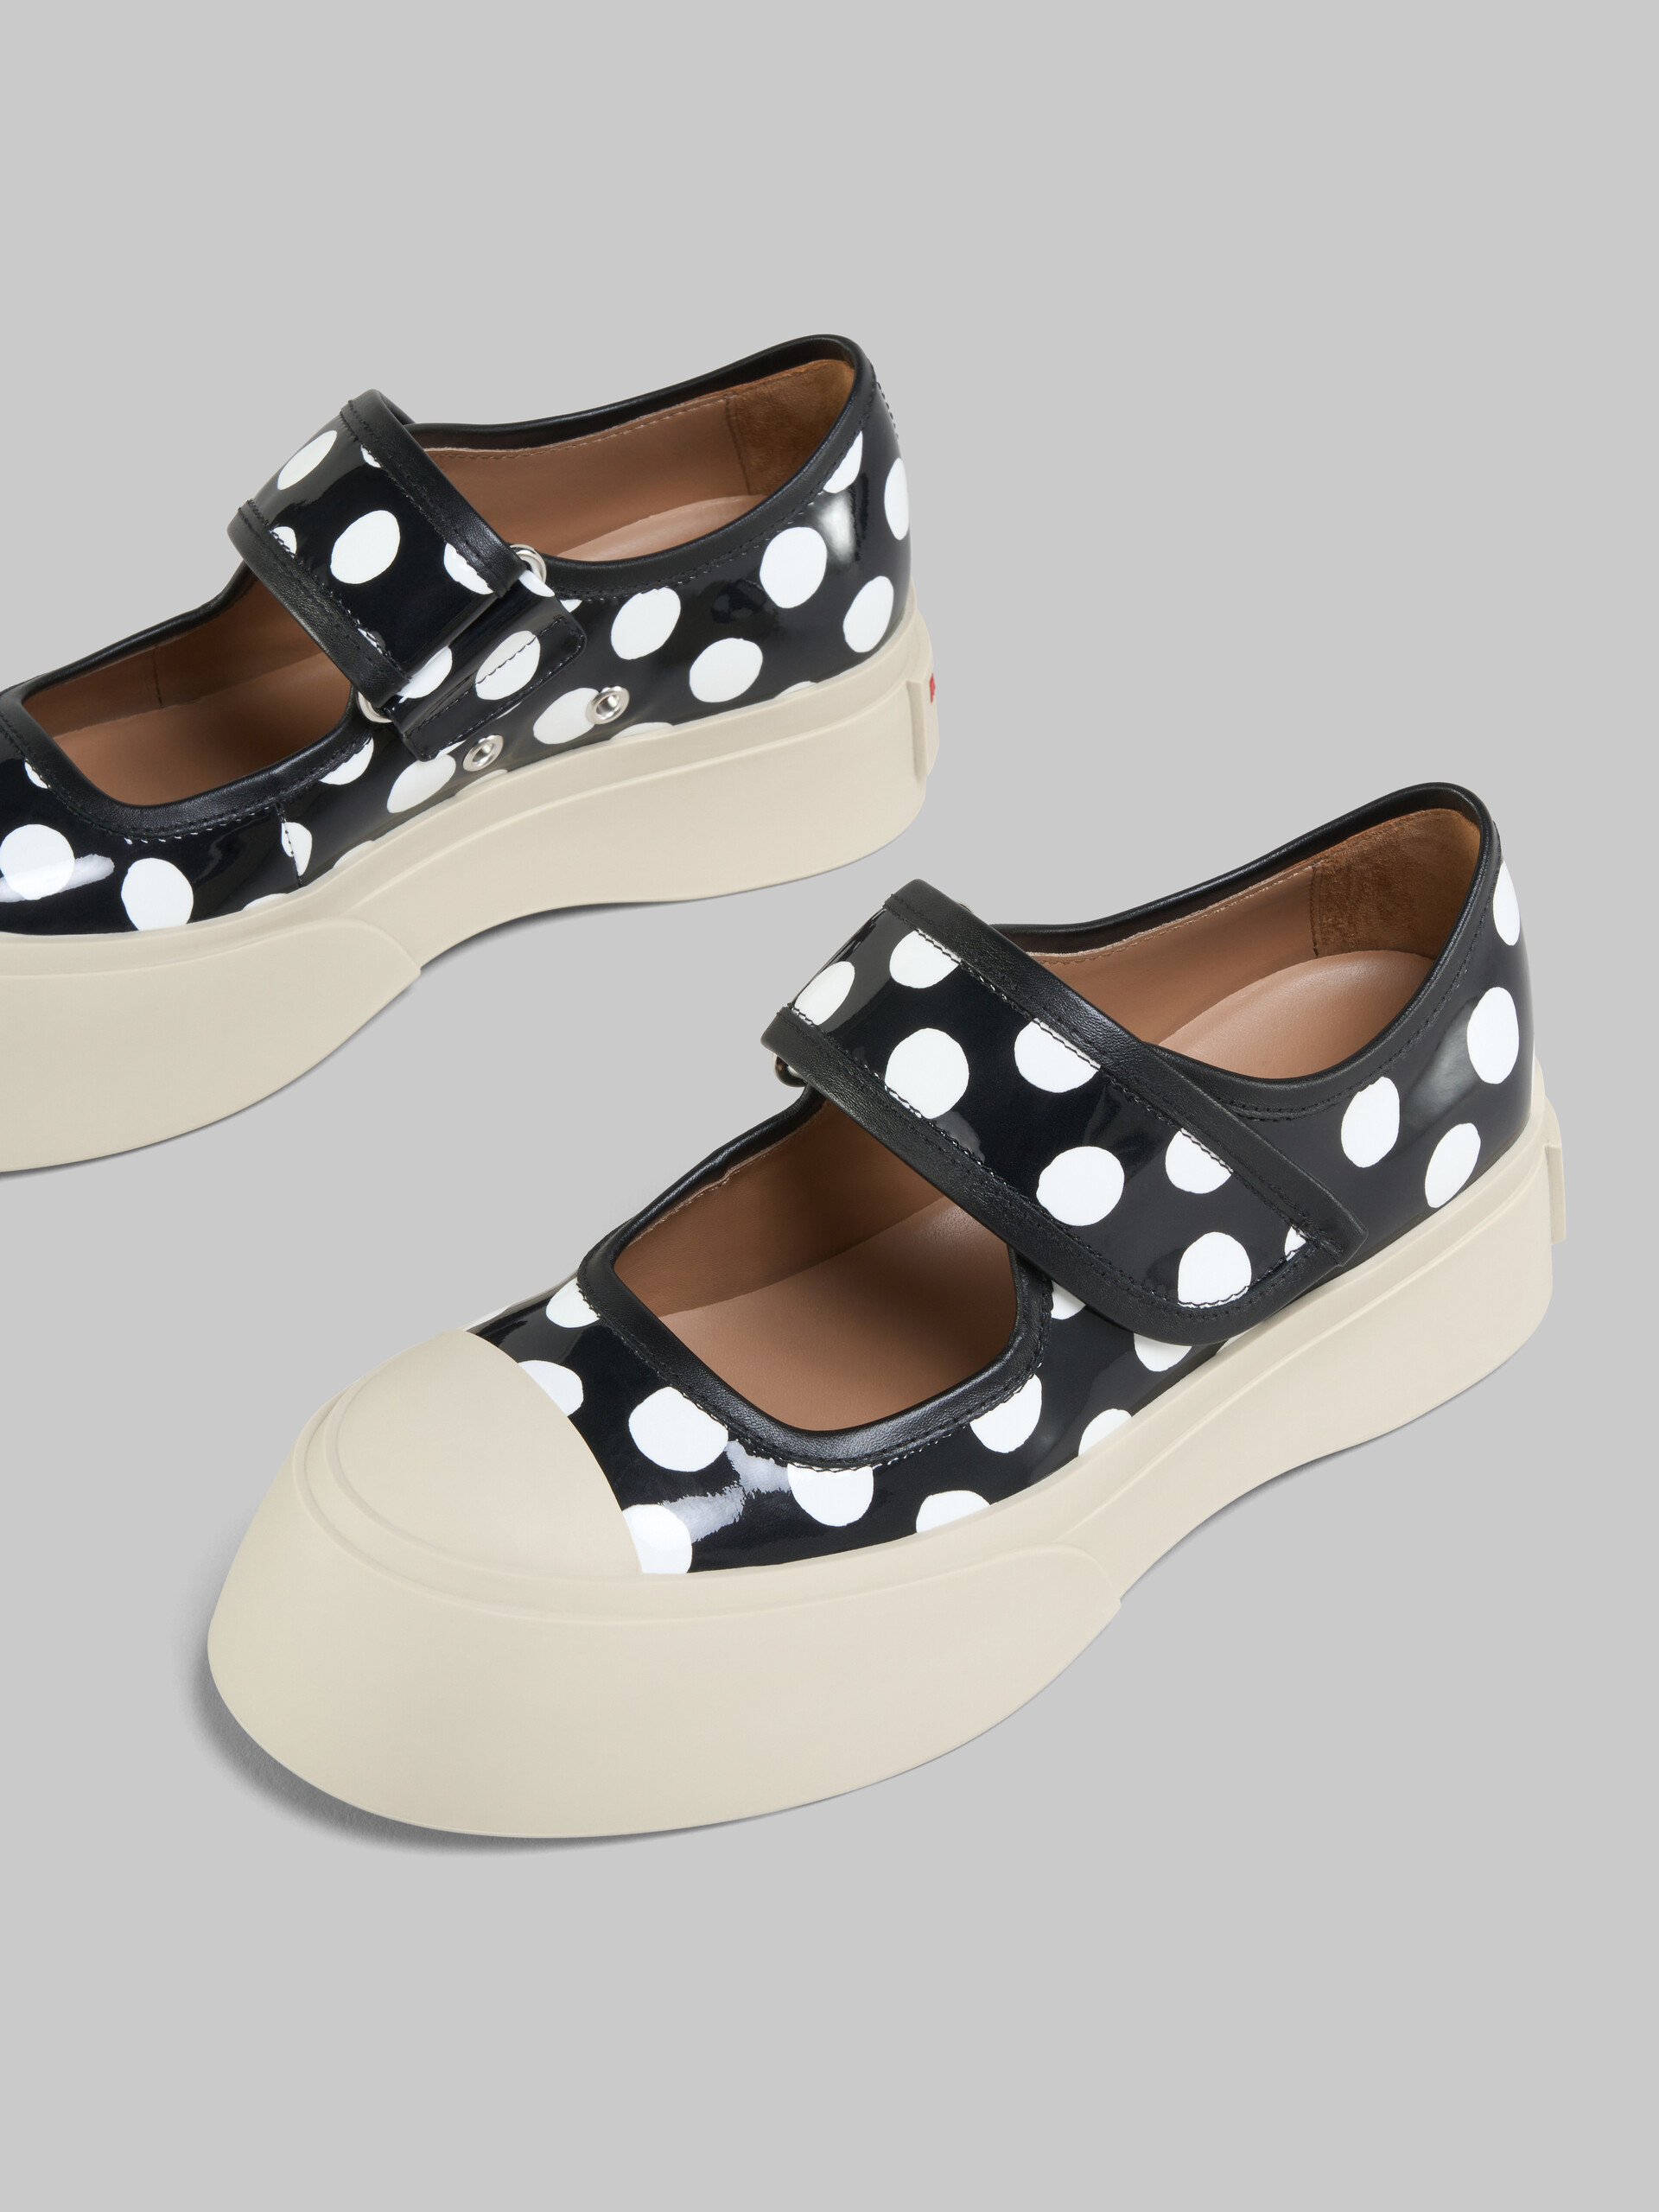 Black and white polka-dot patent leather Pablo Mary Jane sneaker - Sneakers - Image 5